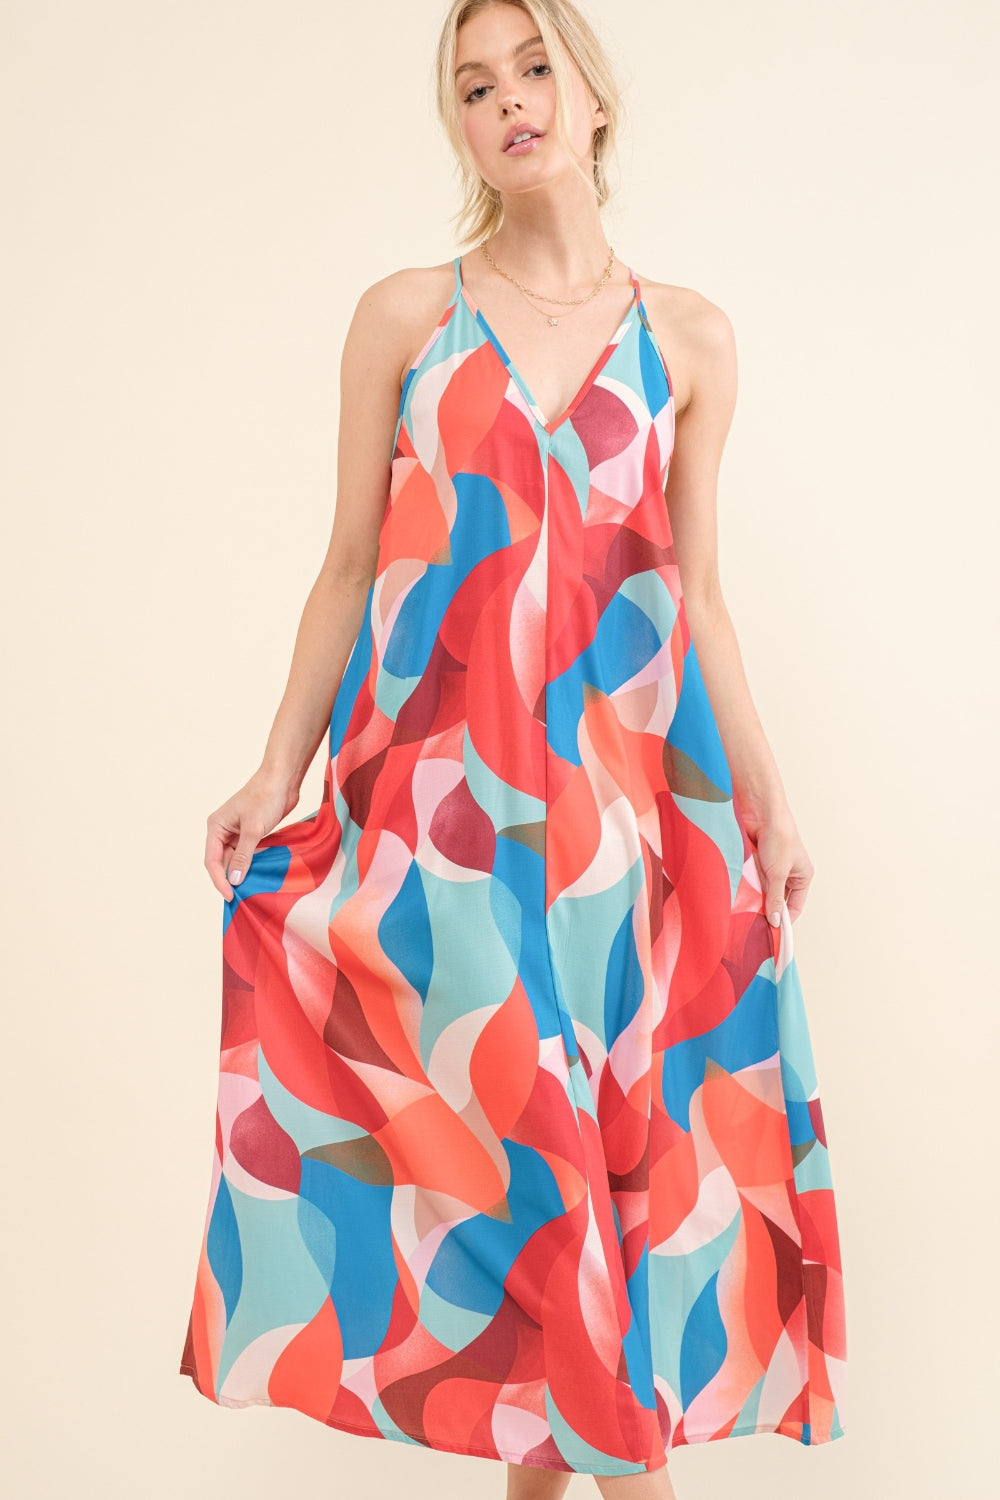 And the Why Printed Blue Multi Crisscross Back Cami Dress